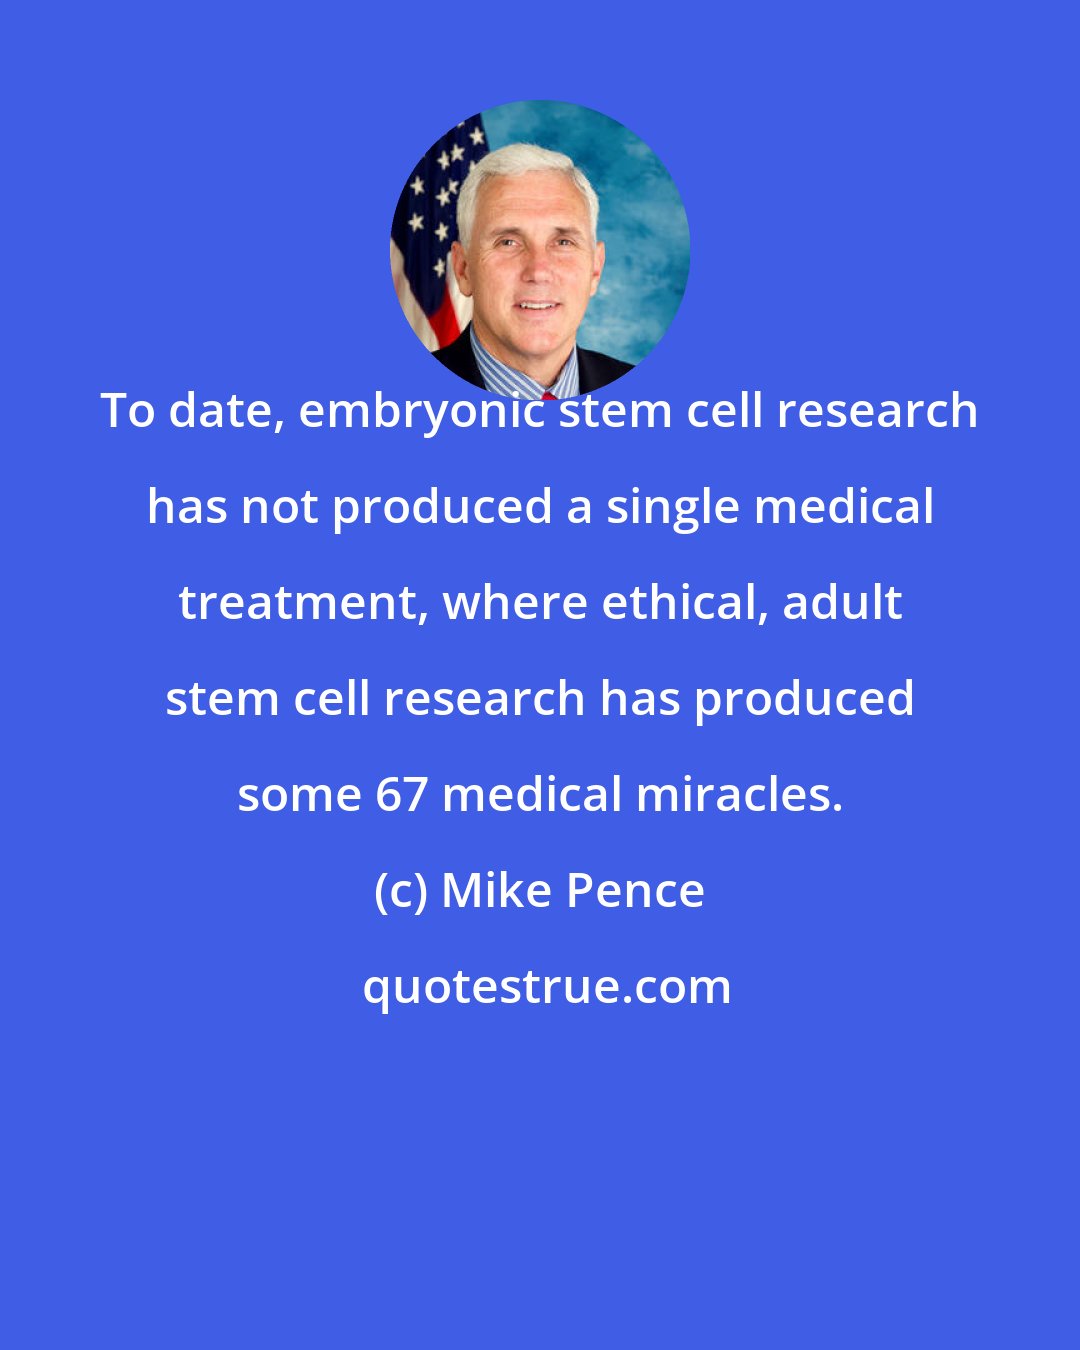 Mike Pence: To date, embryonic stem cell research has not produced a single medical treatment, where ethical, adult stem cell research has produced some 67 medical miracles.